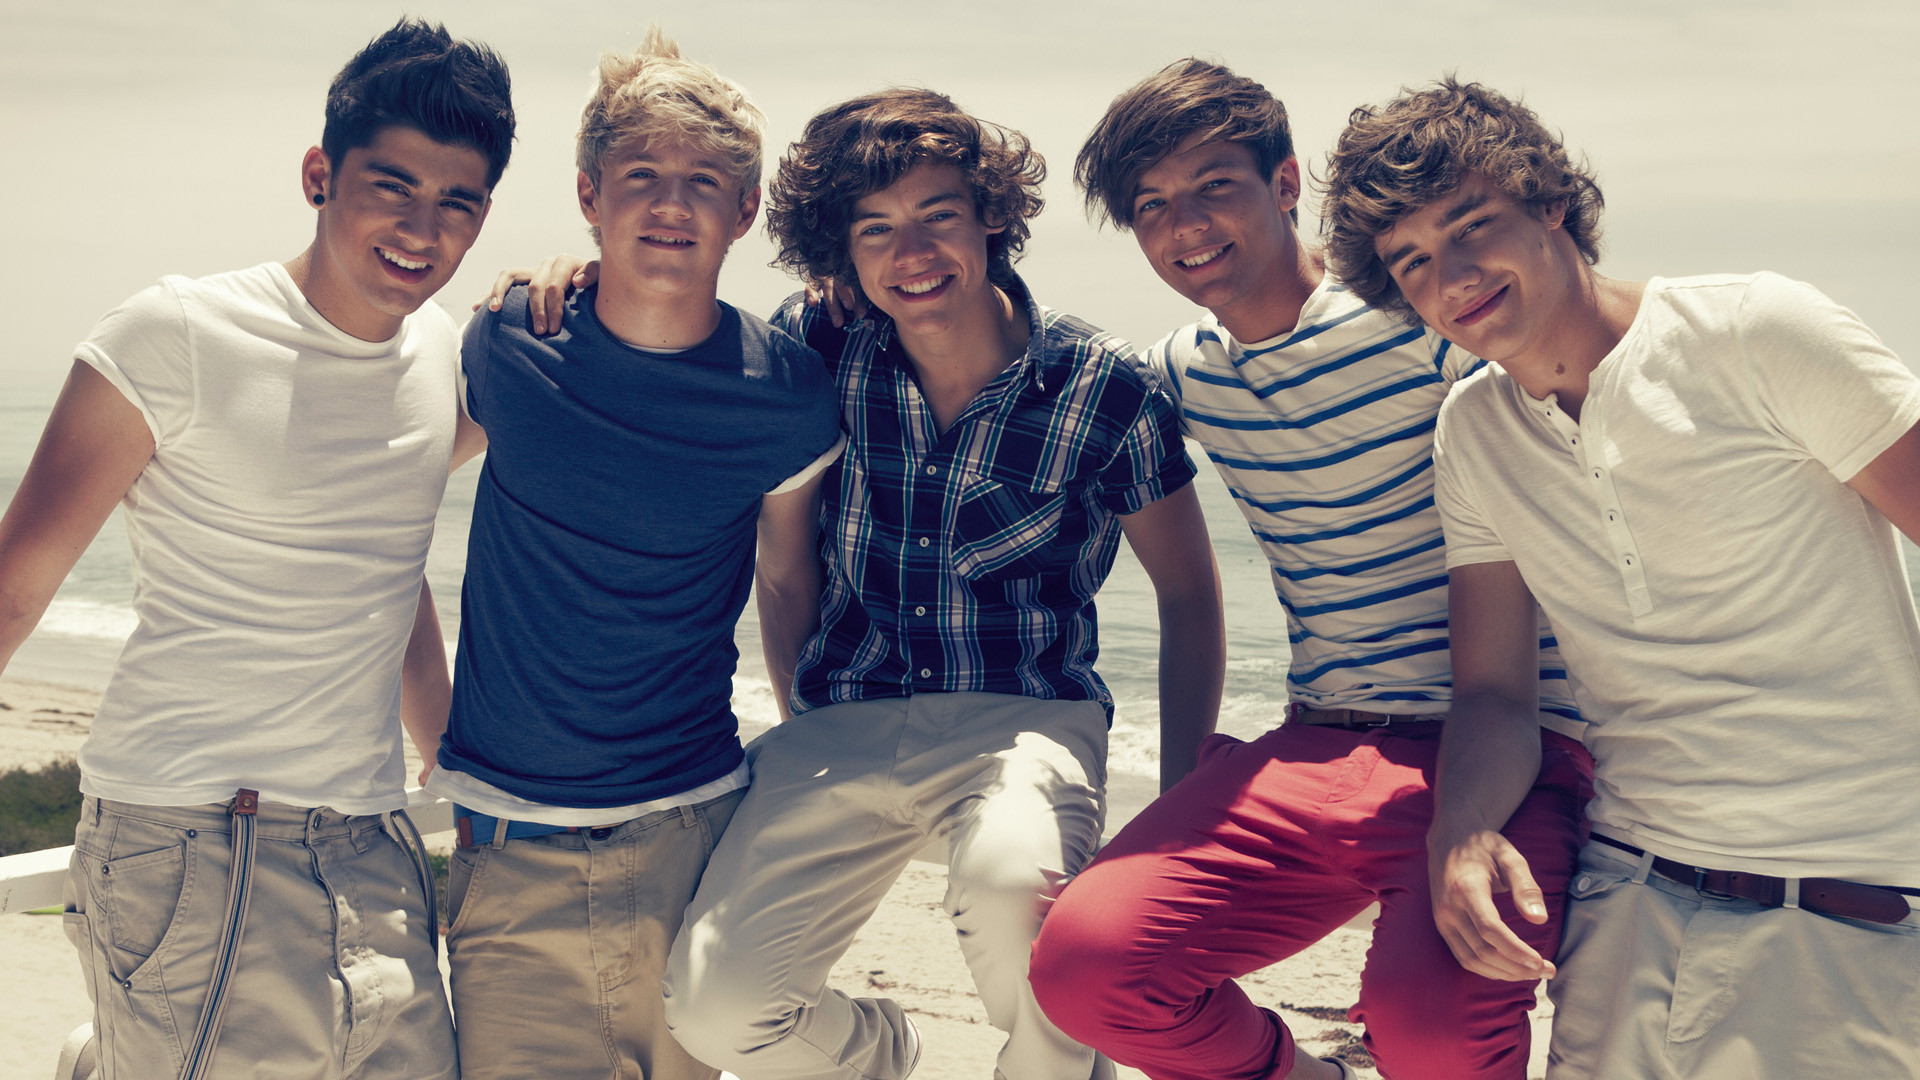 1920x1080 Cute One Direction Wallpapers HD.